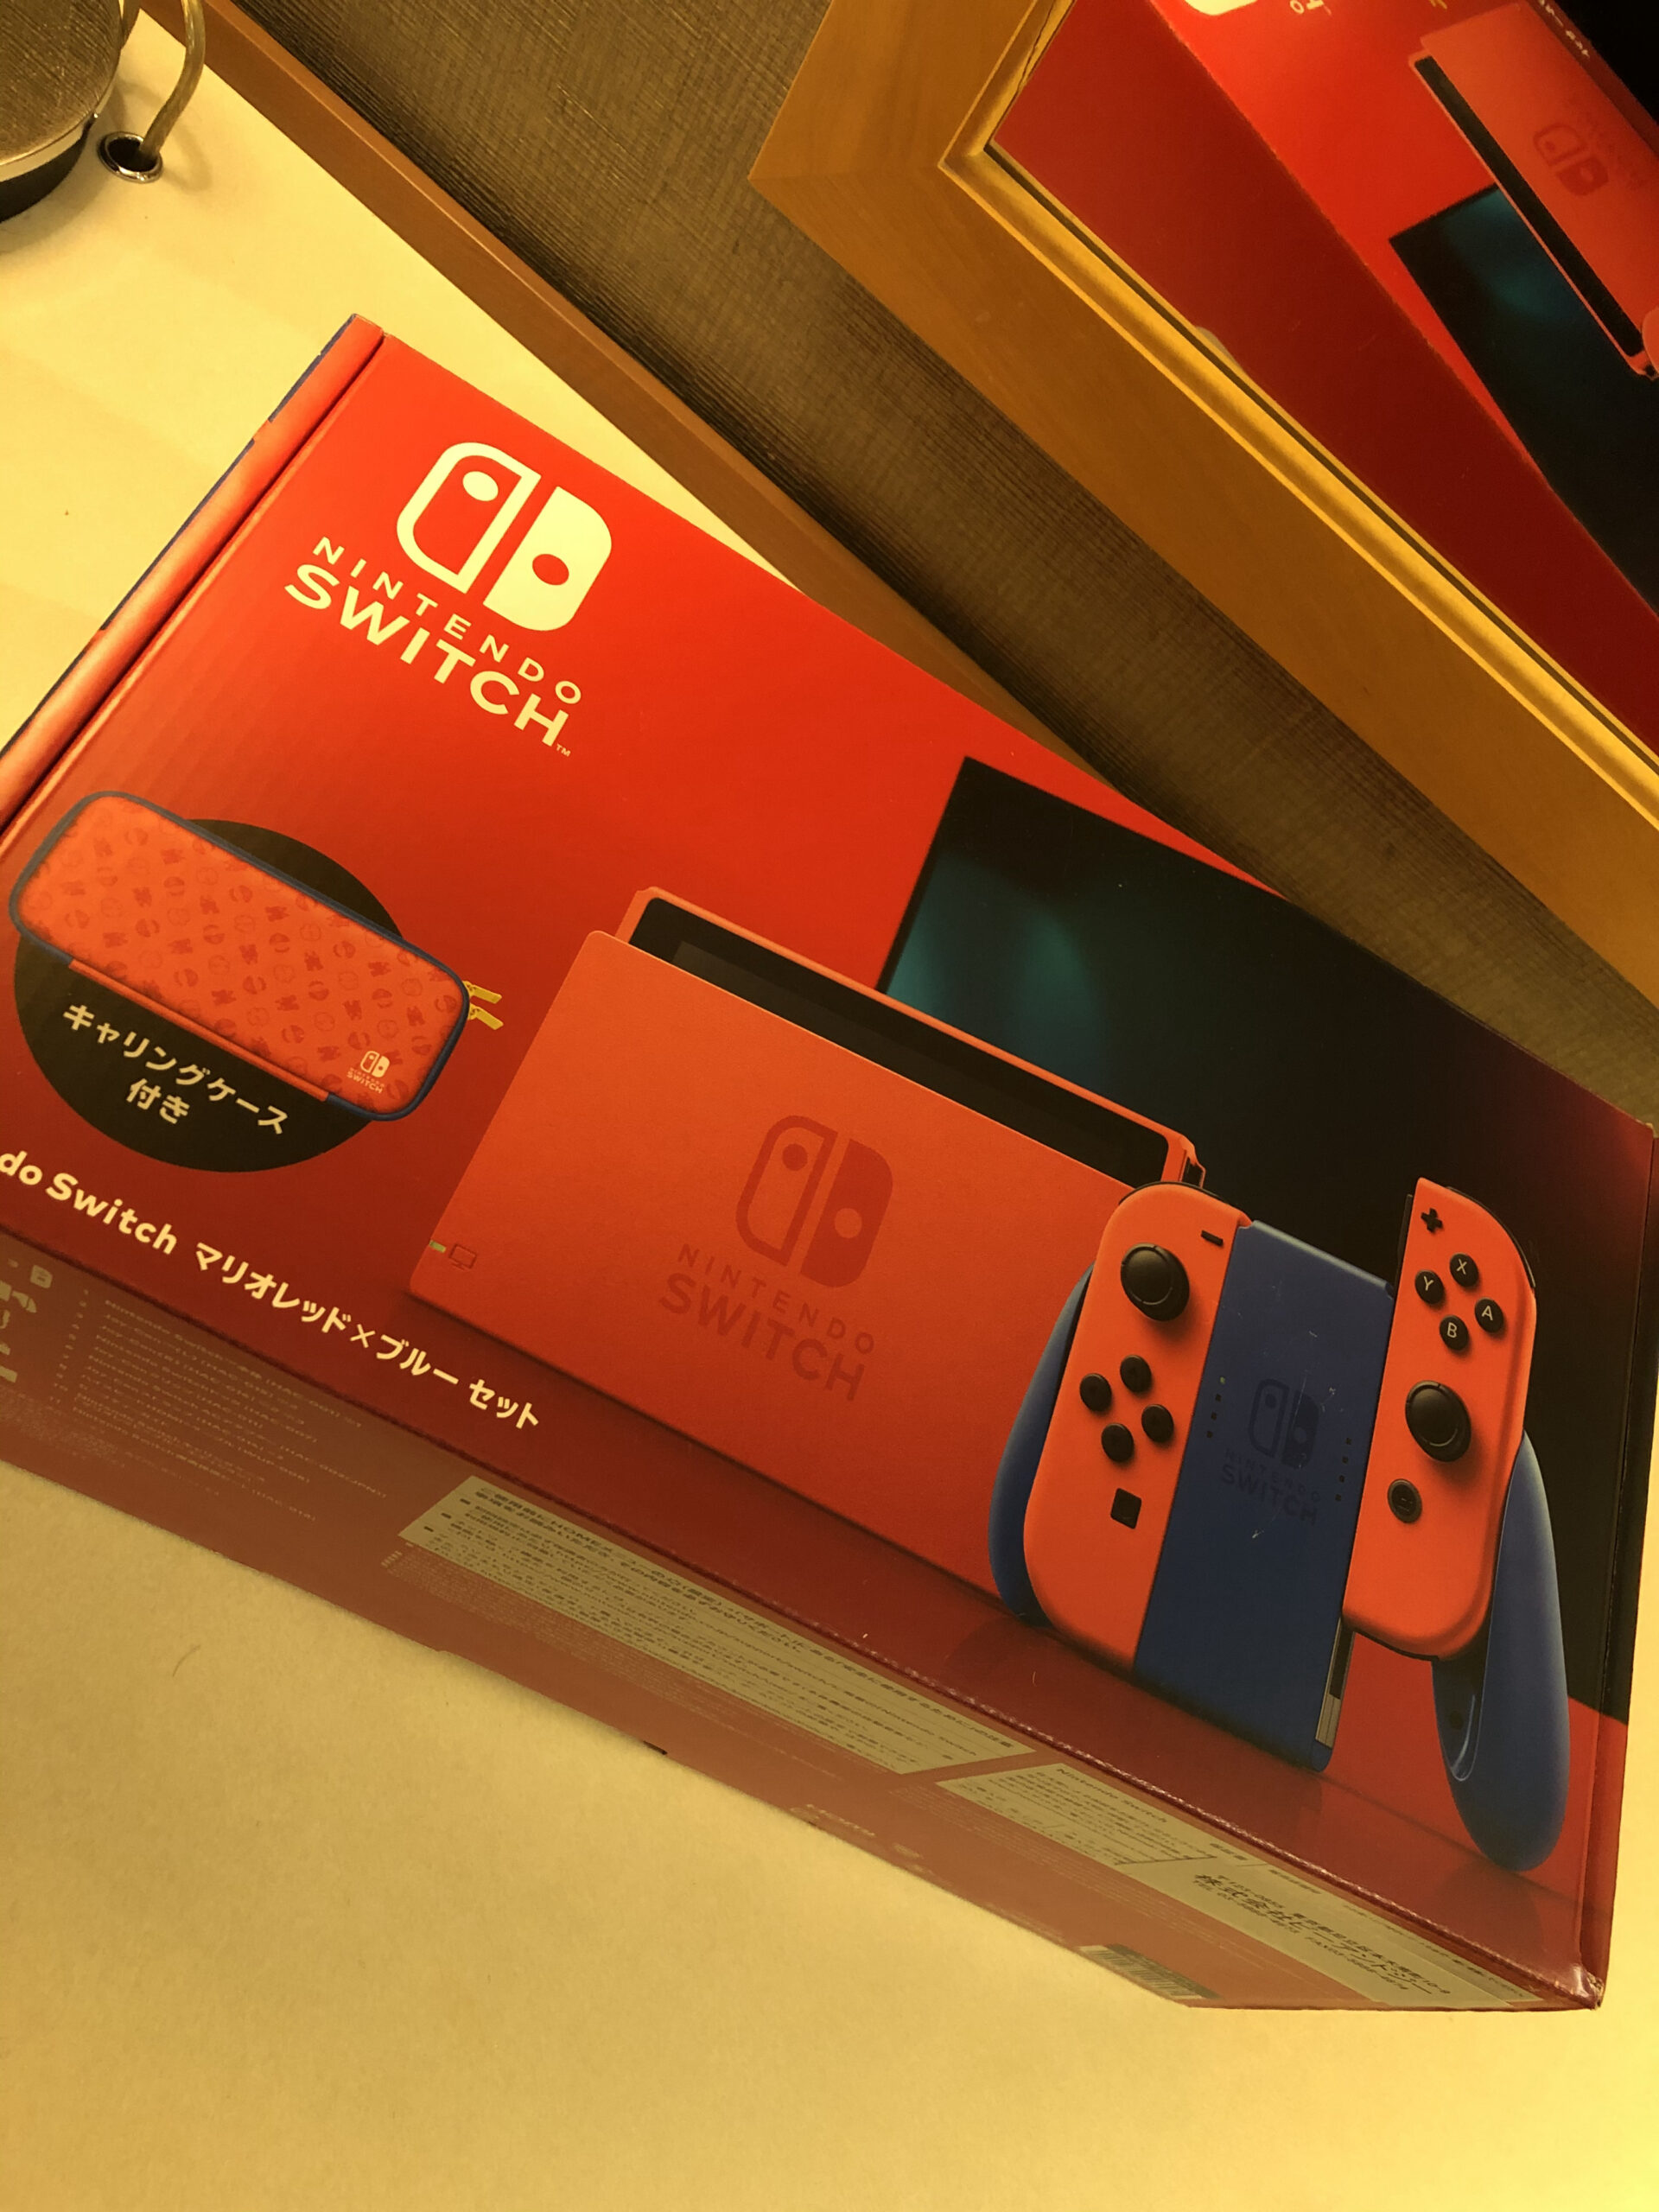 Unboxing Video: Nintendo Switch, Mario Red & Blue Edition - A carne é fraca!